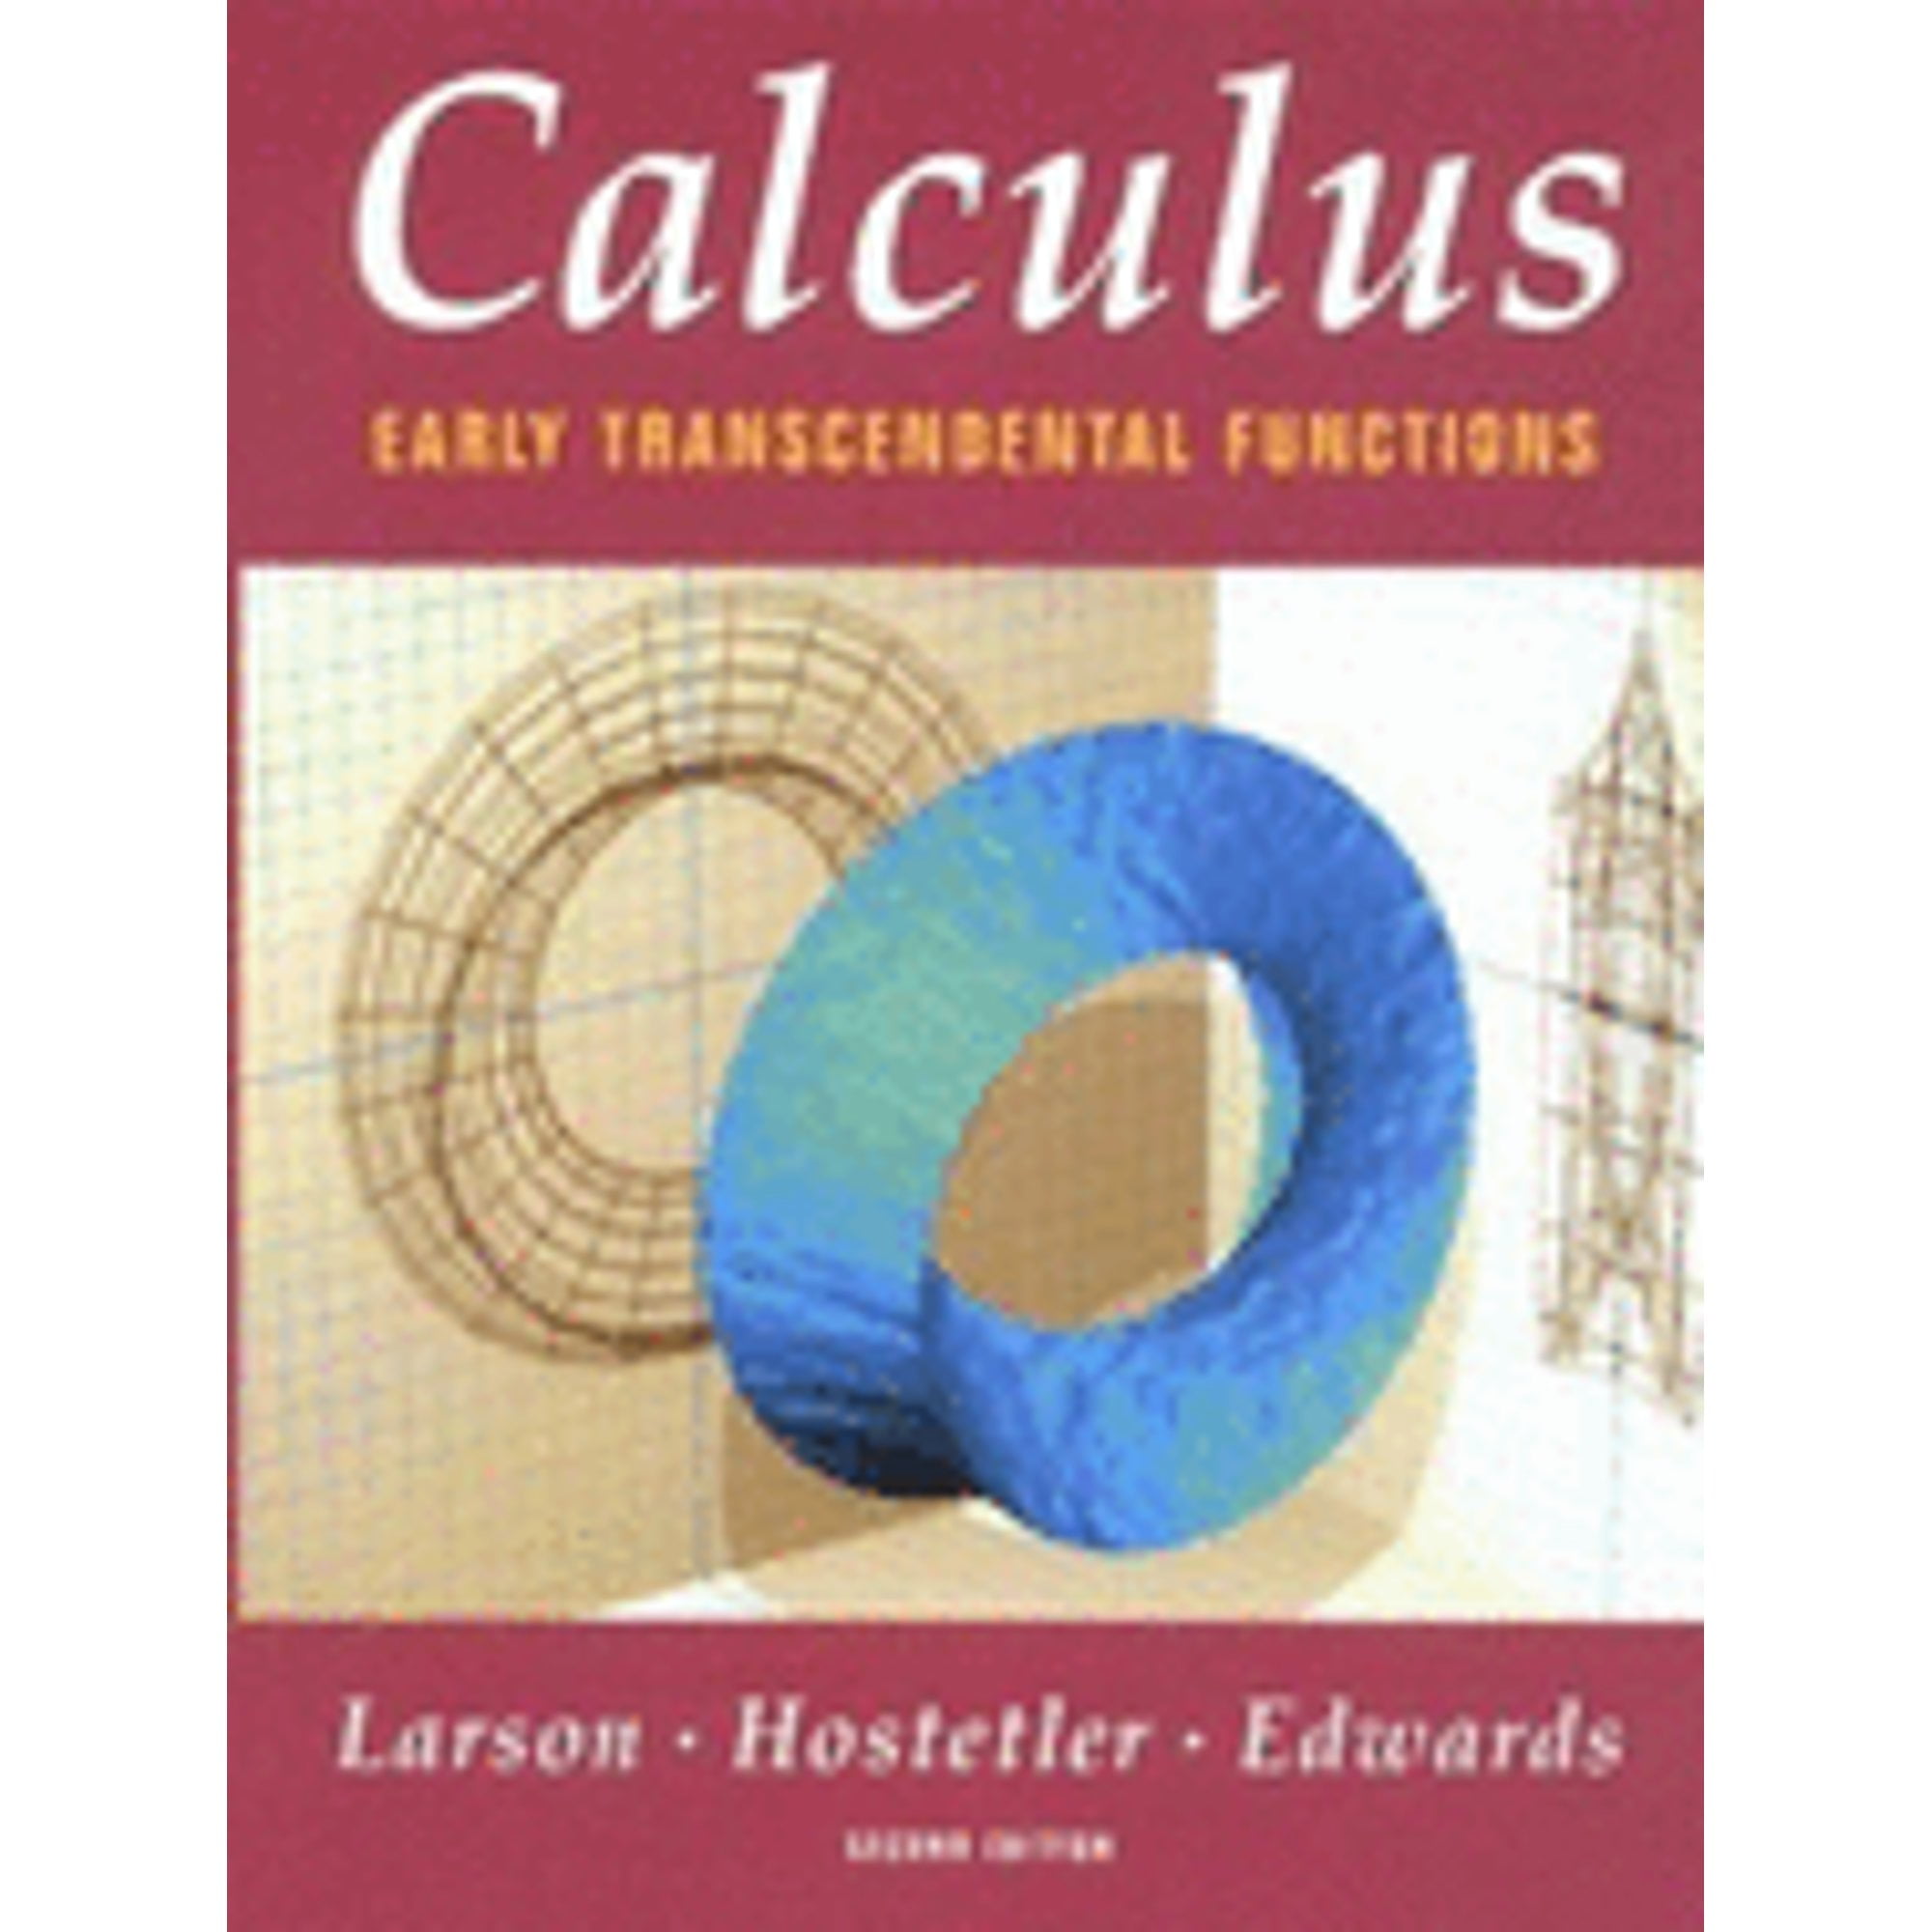 Calculus Early Transcendental Functions Second Edition Pre Owned Hardcover 9780395933206 By 5896